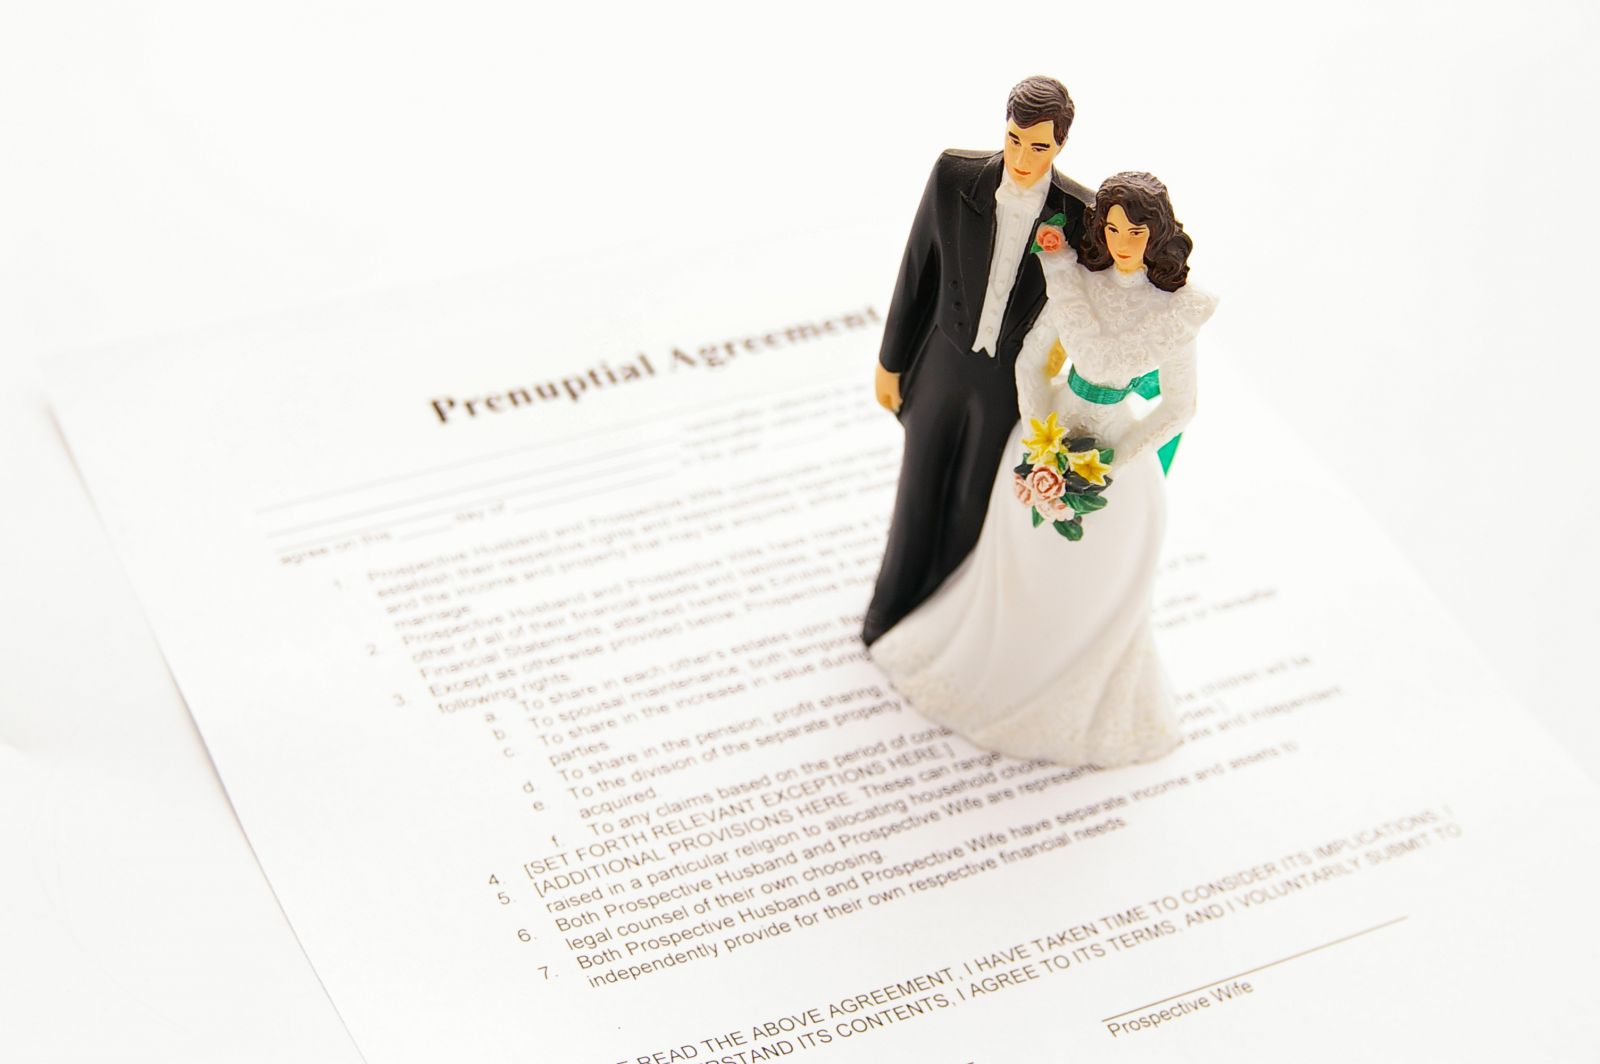 An update on the status and enforceability of prenuptial agreements in Hong Kong